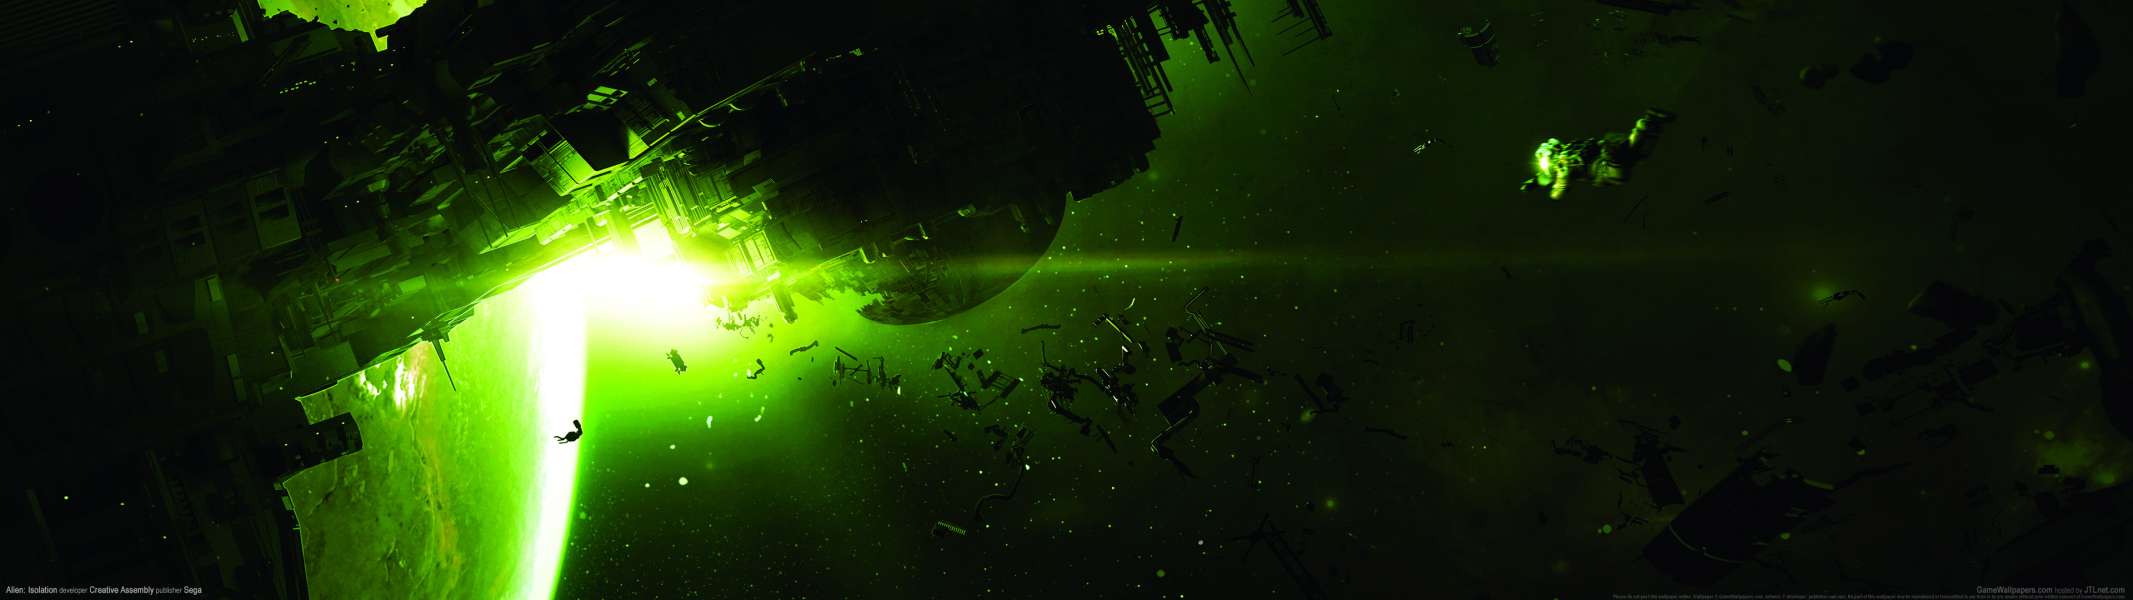 Alien: Isolation dual screen wallpaper or background